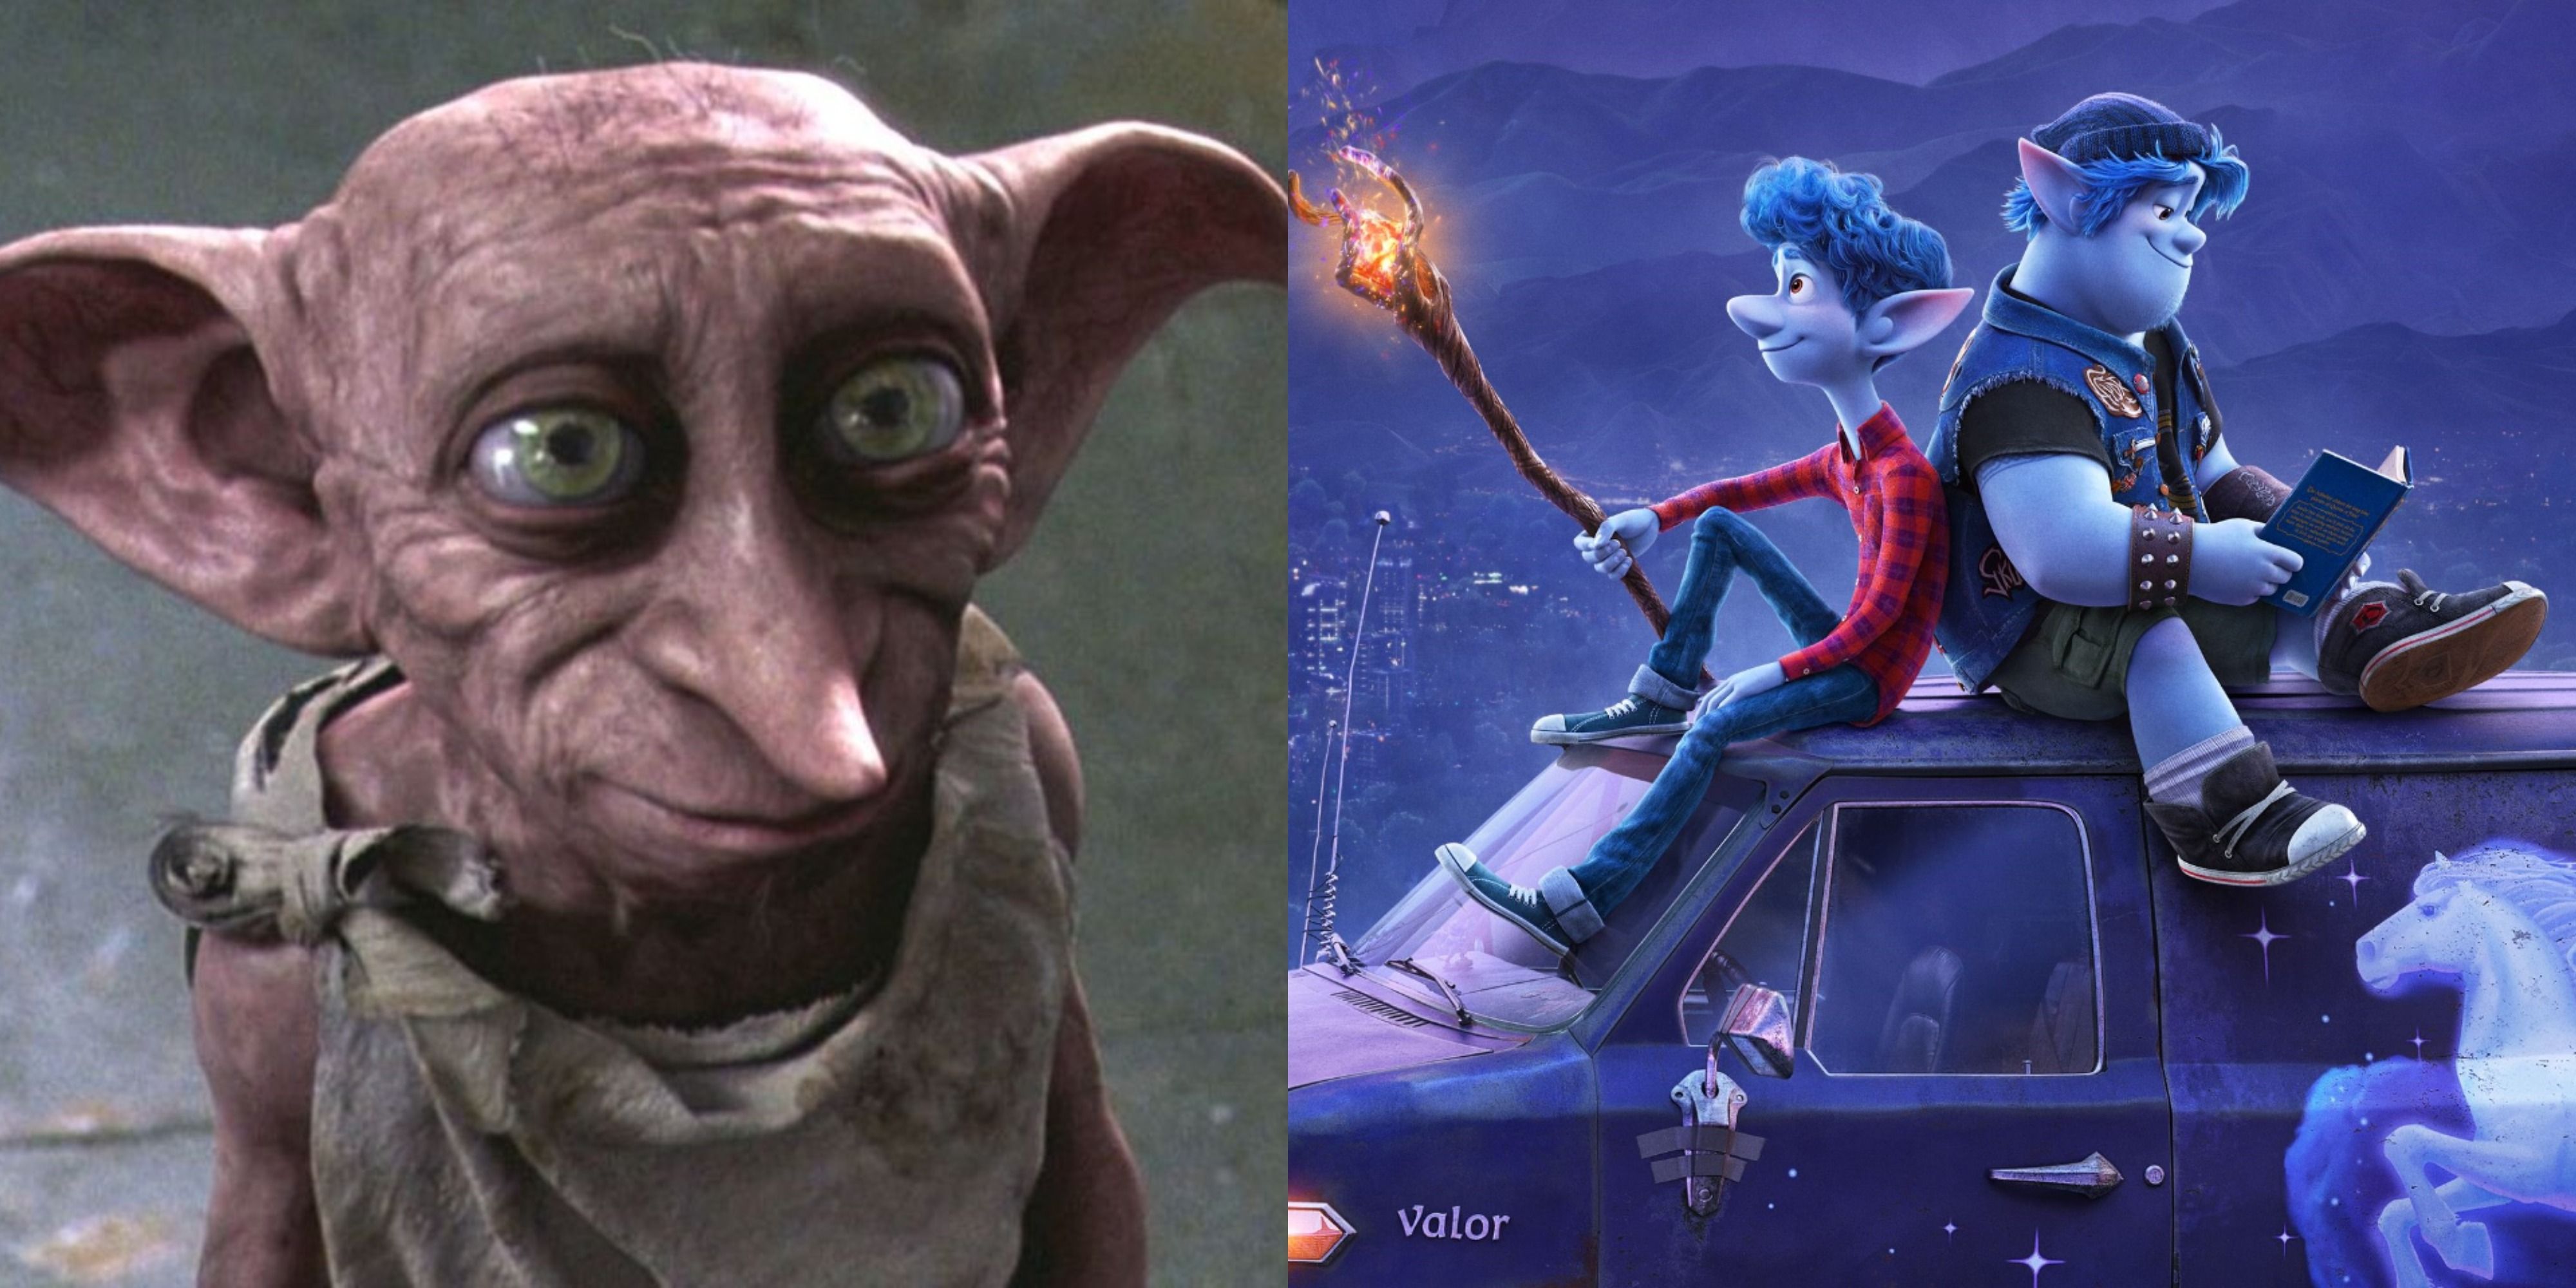 Featured image Dobby from Harry Potter and the main characters of Onward